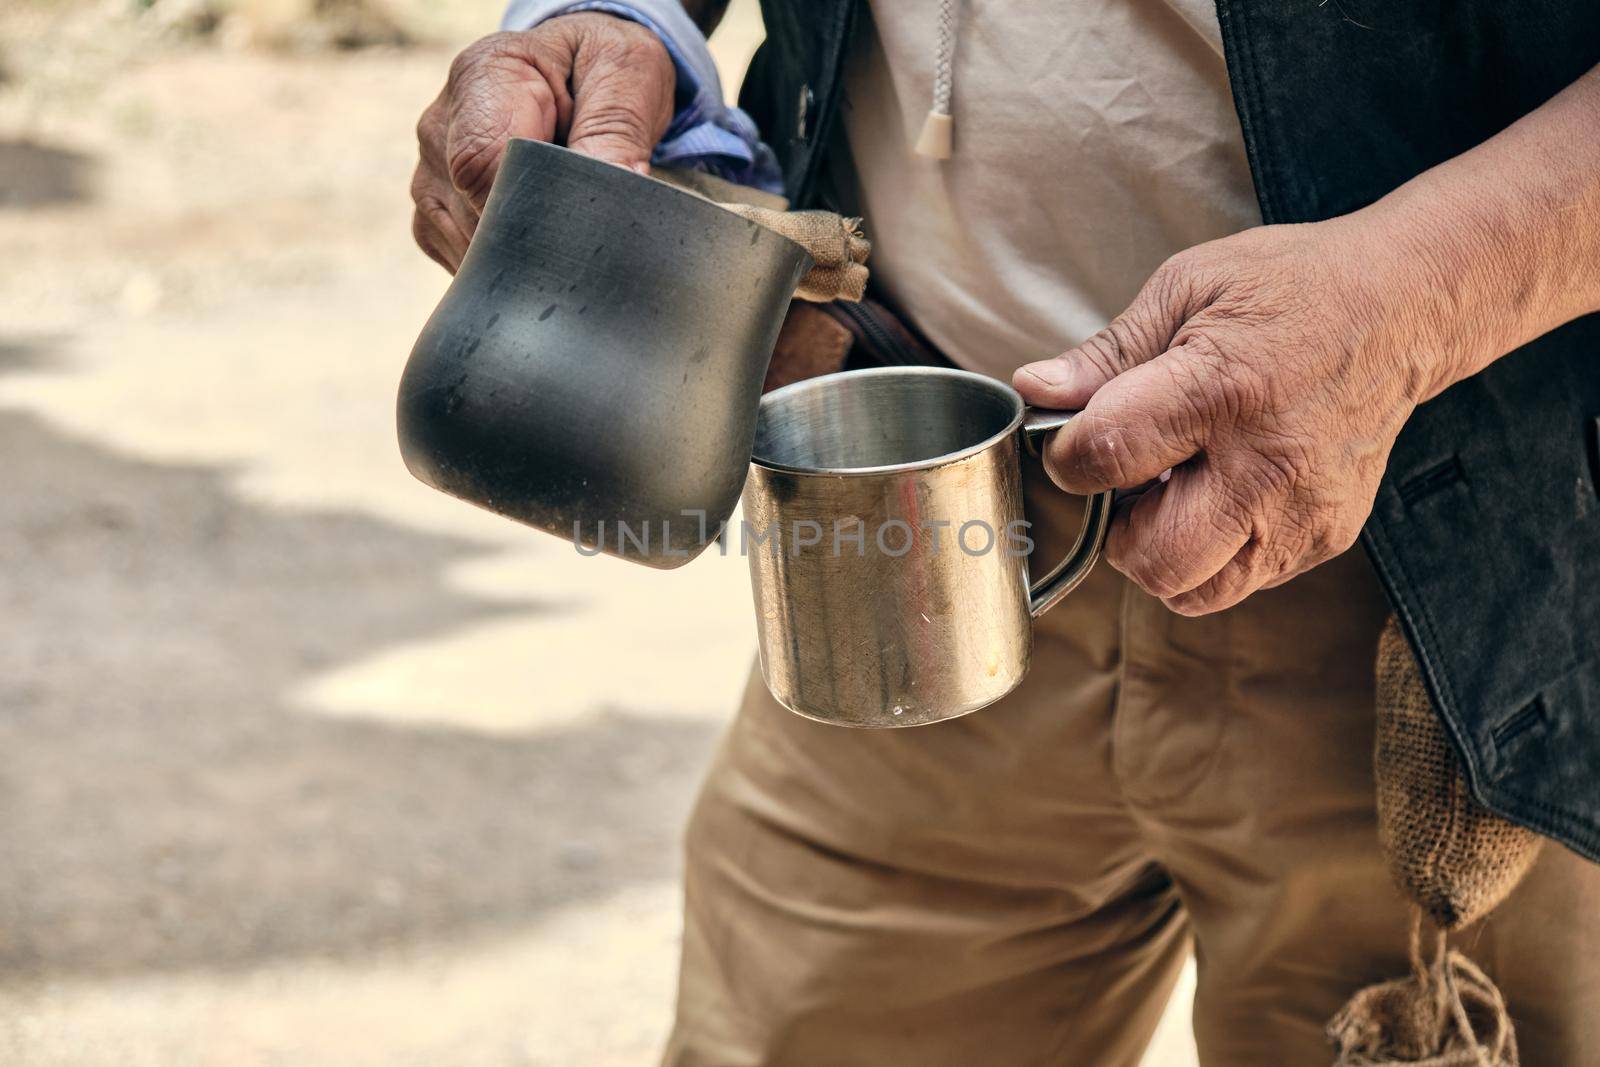 Hands of an adult man pouring hot coffee from a turk into a metal mug